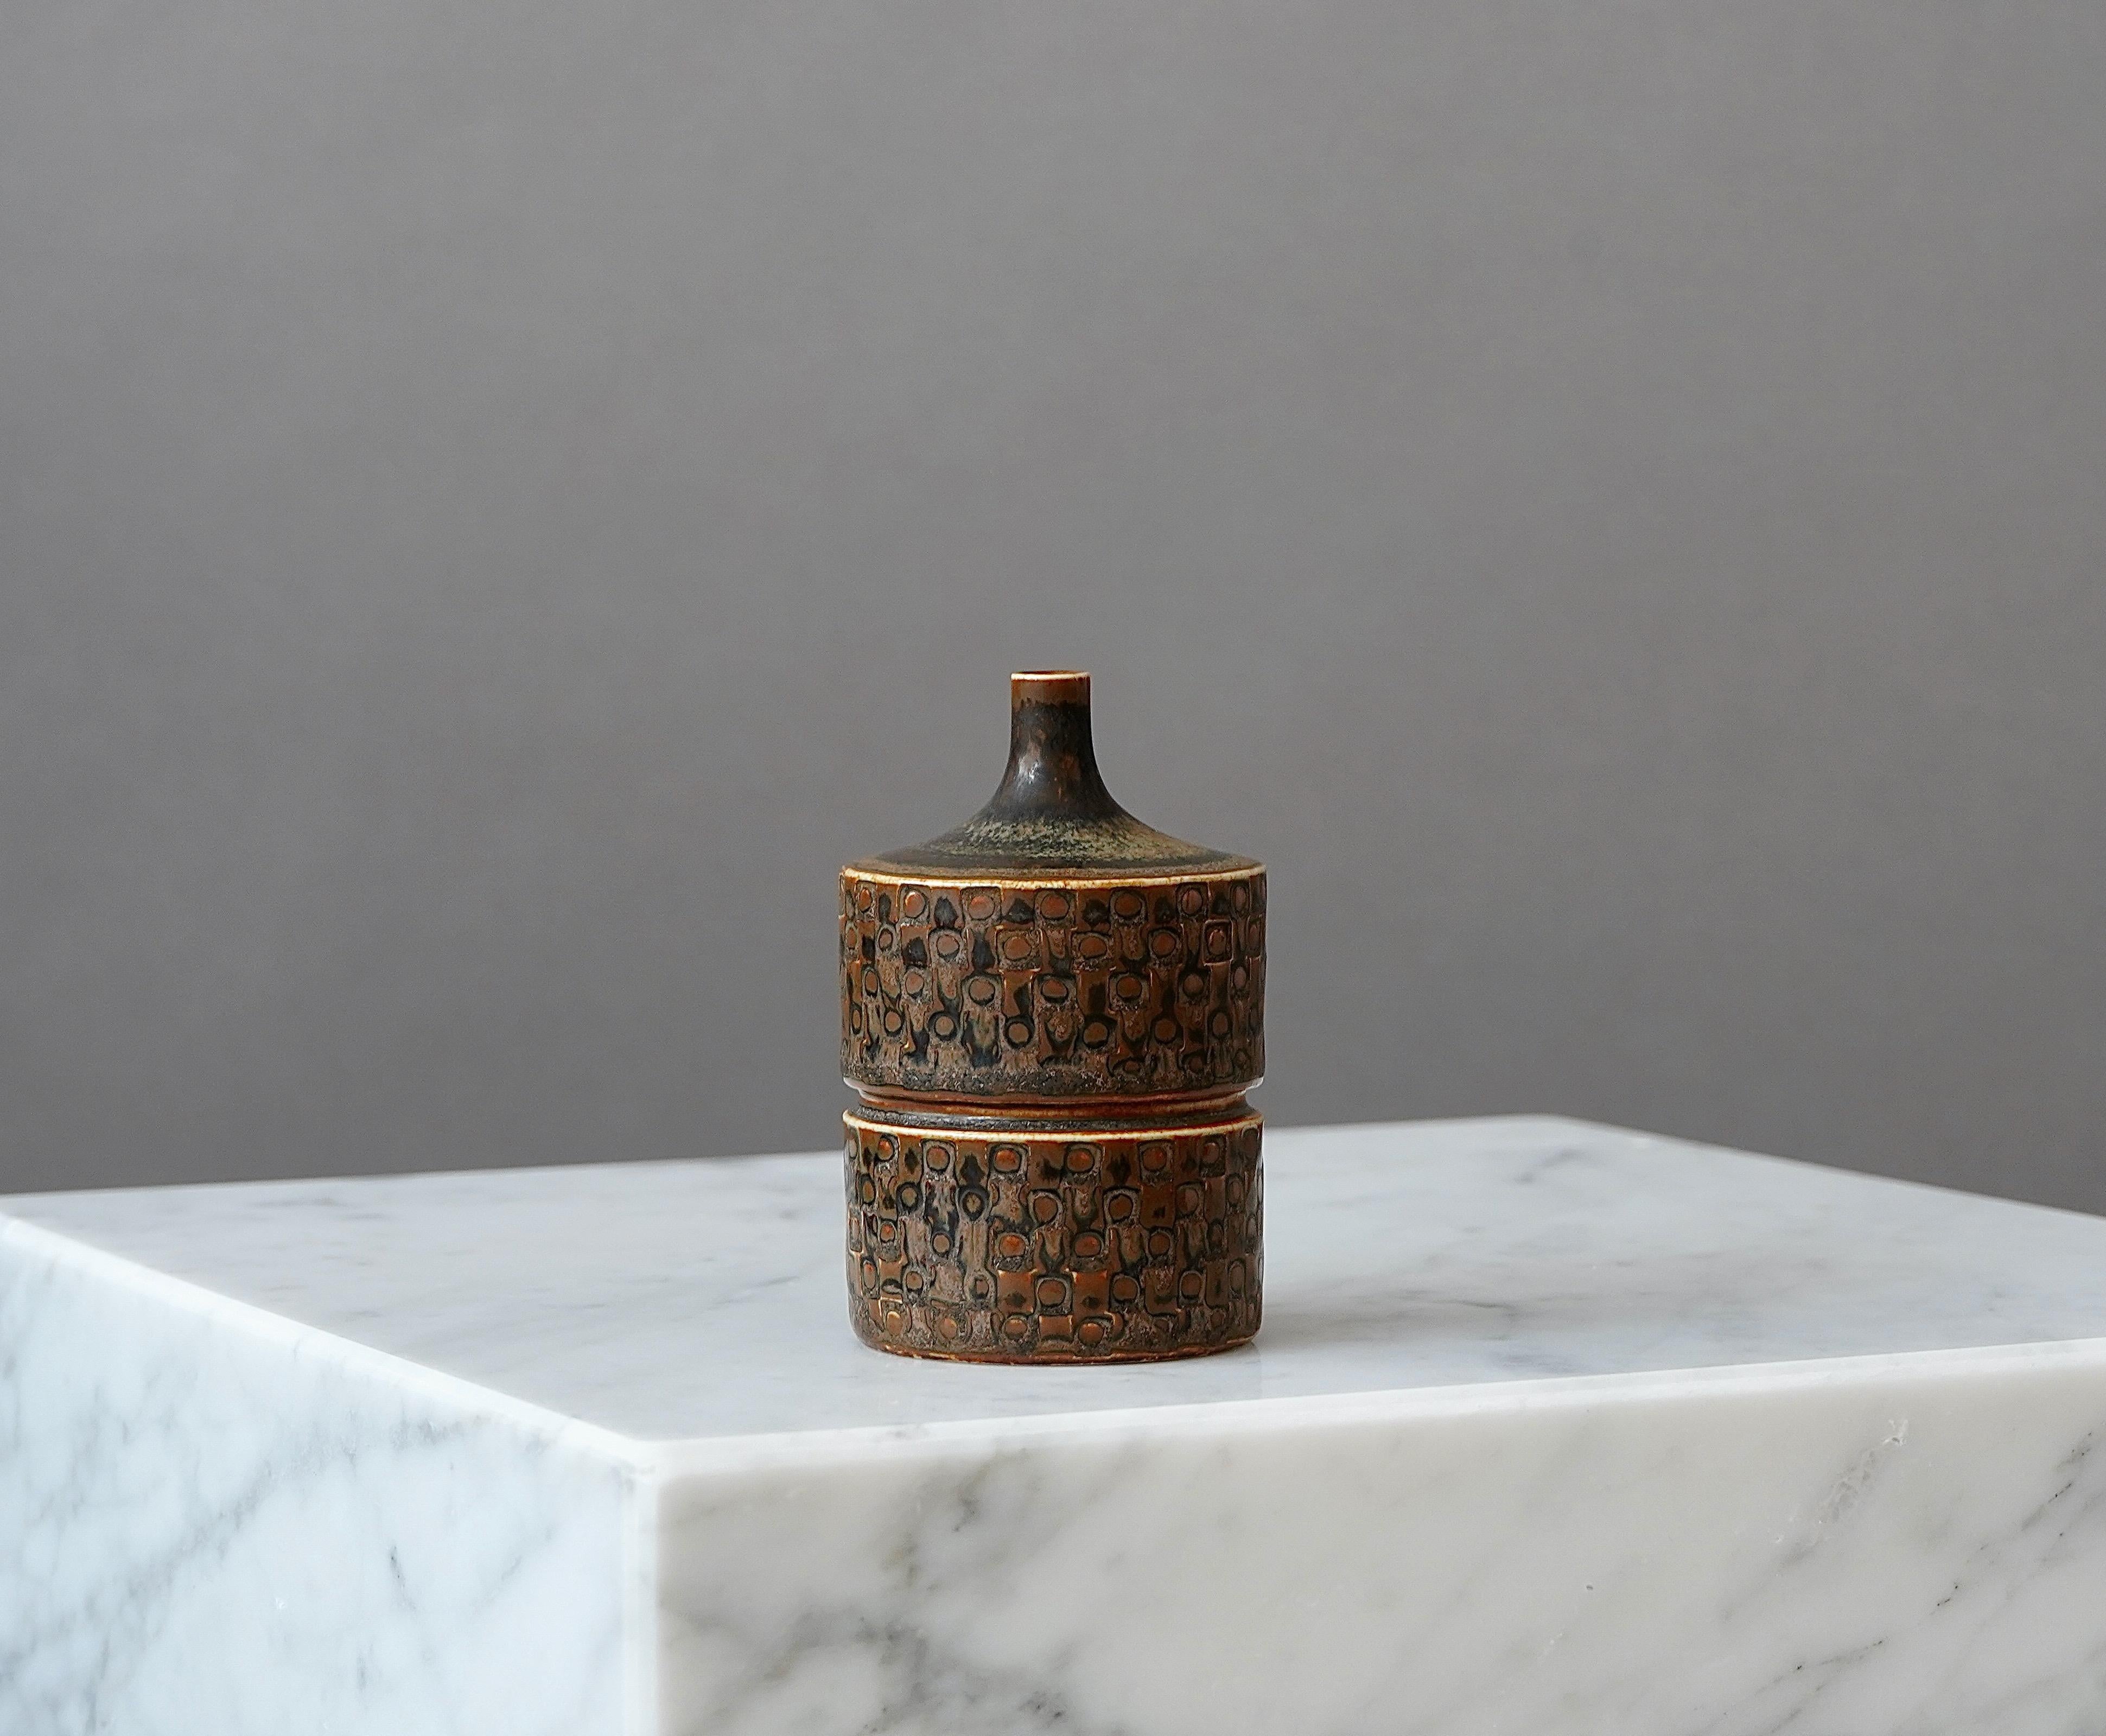 A beautiful and unique stoneware vase with amazing glaze.
Made by Stig Lindberg in Gustavsberg Studio, Sweden. 1962.

Excellent condition.
Incised 